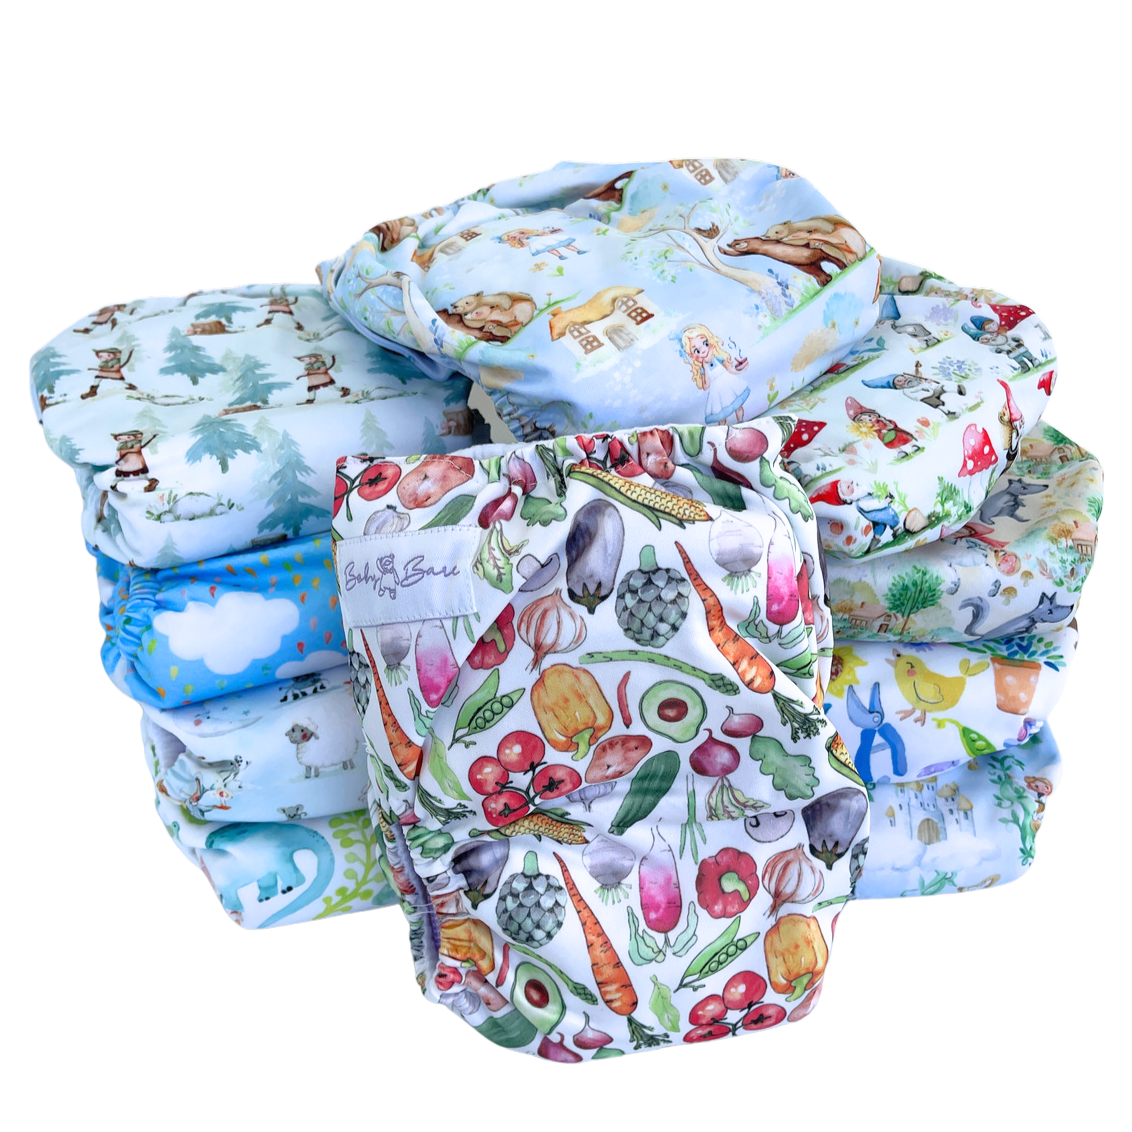 A pile of cloth nappies with one clearly visible at the front. 